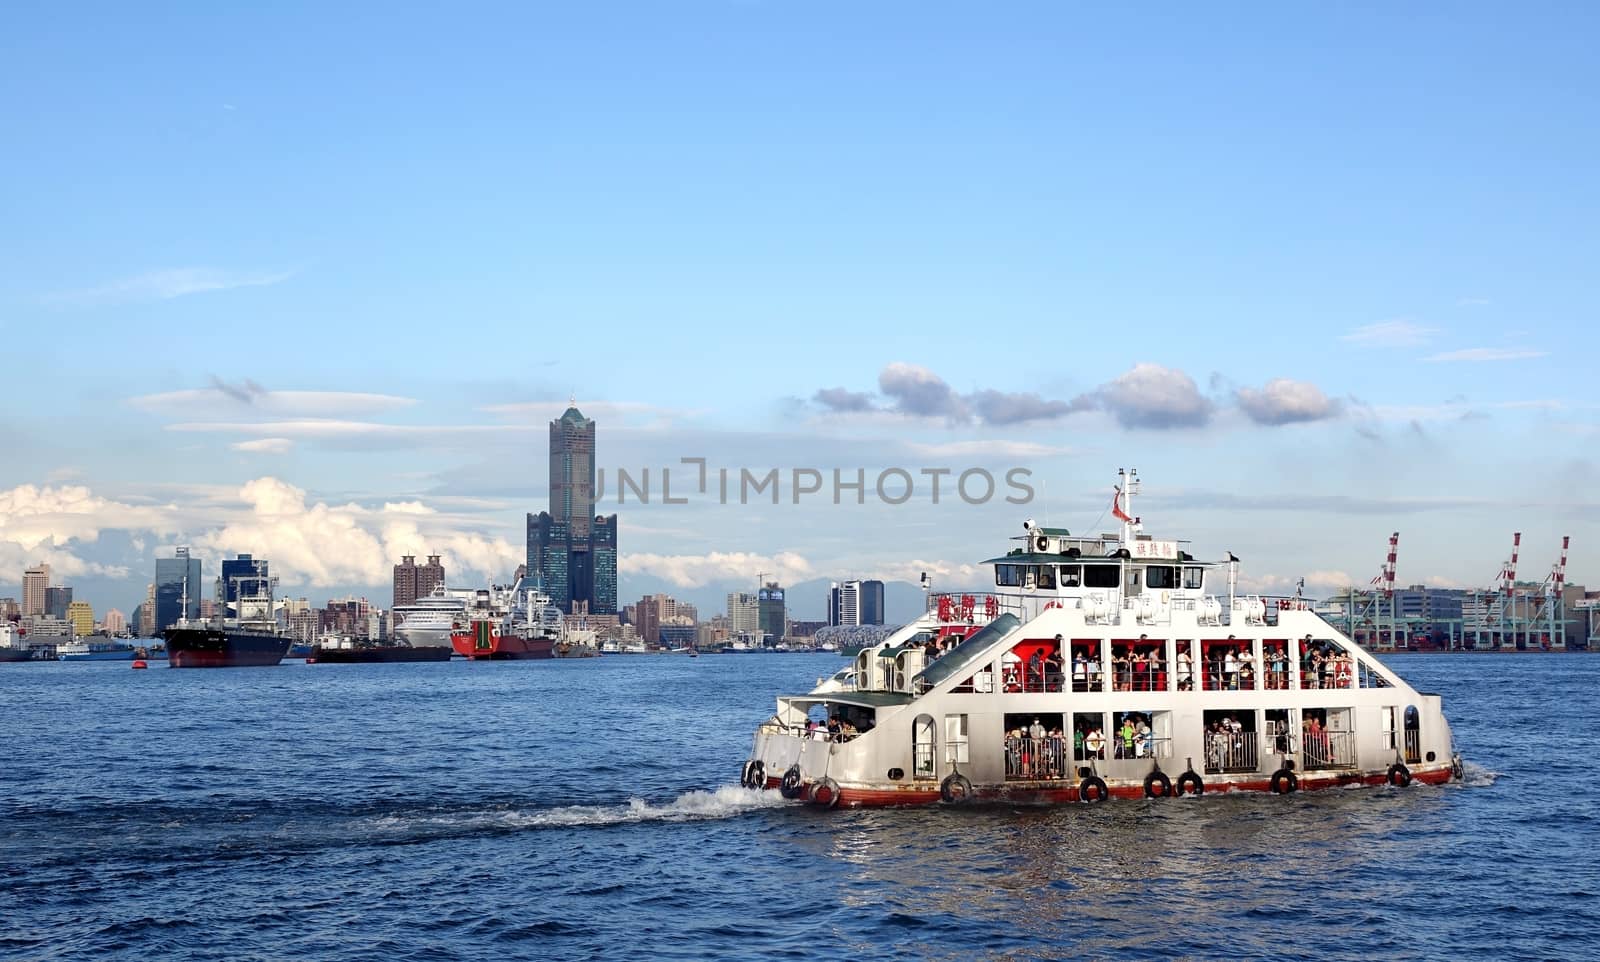 KAOHSIUNG, TAIWAN -- MAY 11, 2014: A panoramic view of Kaohsiung city and port with the cross-harbor ferry in the foreground